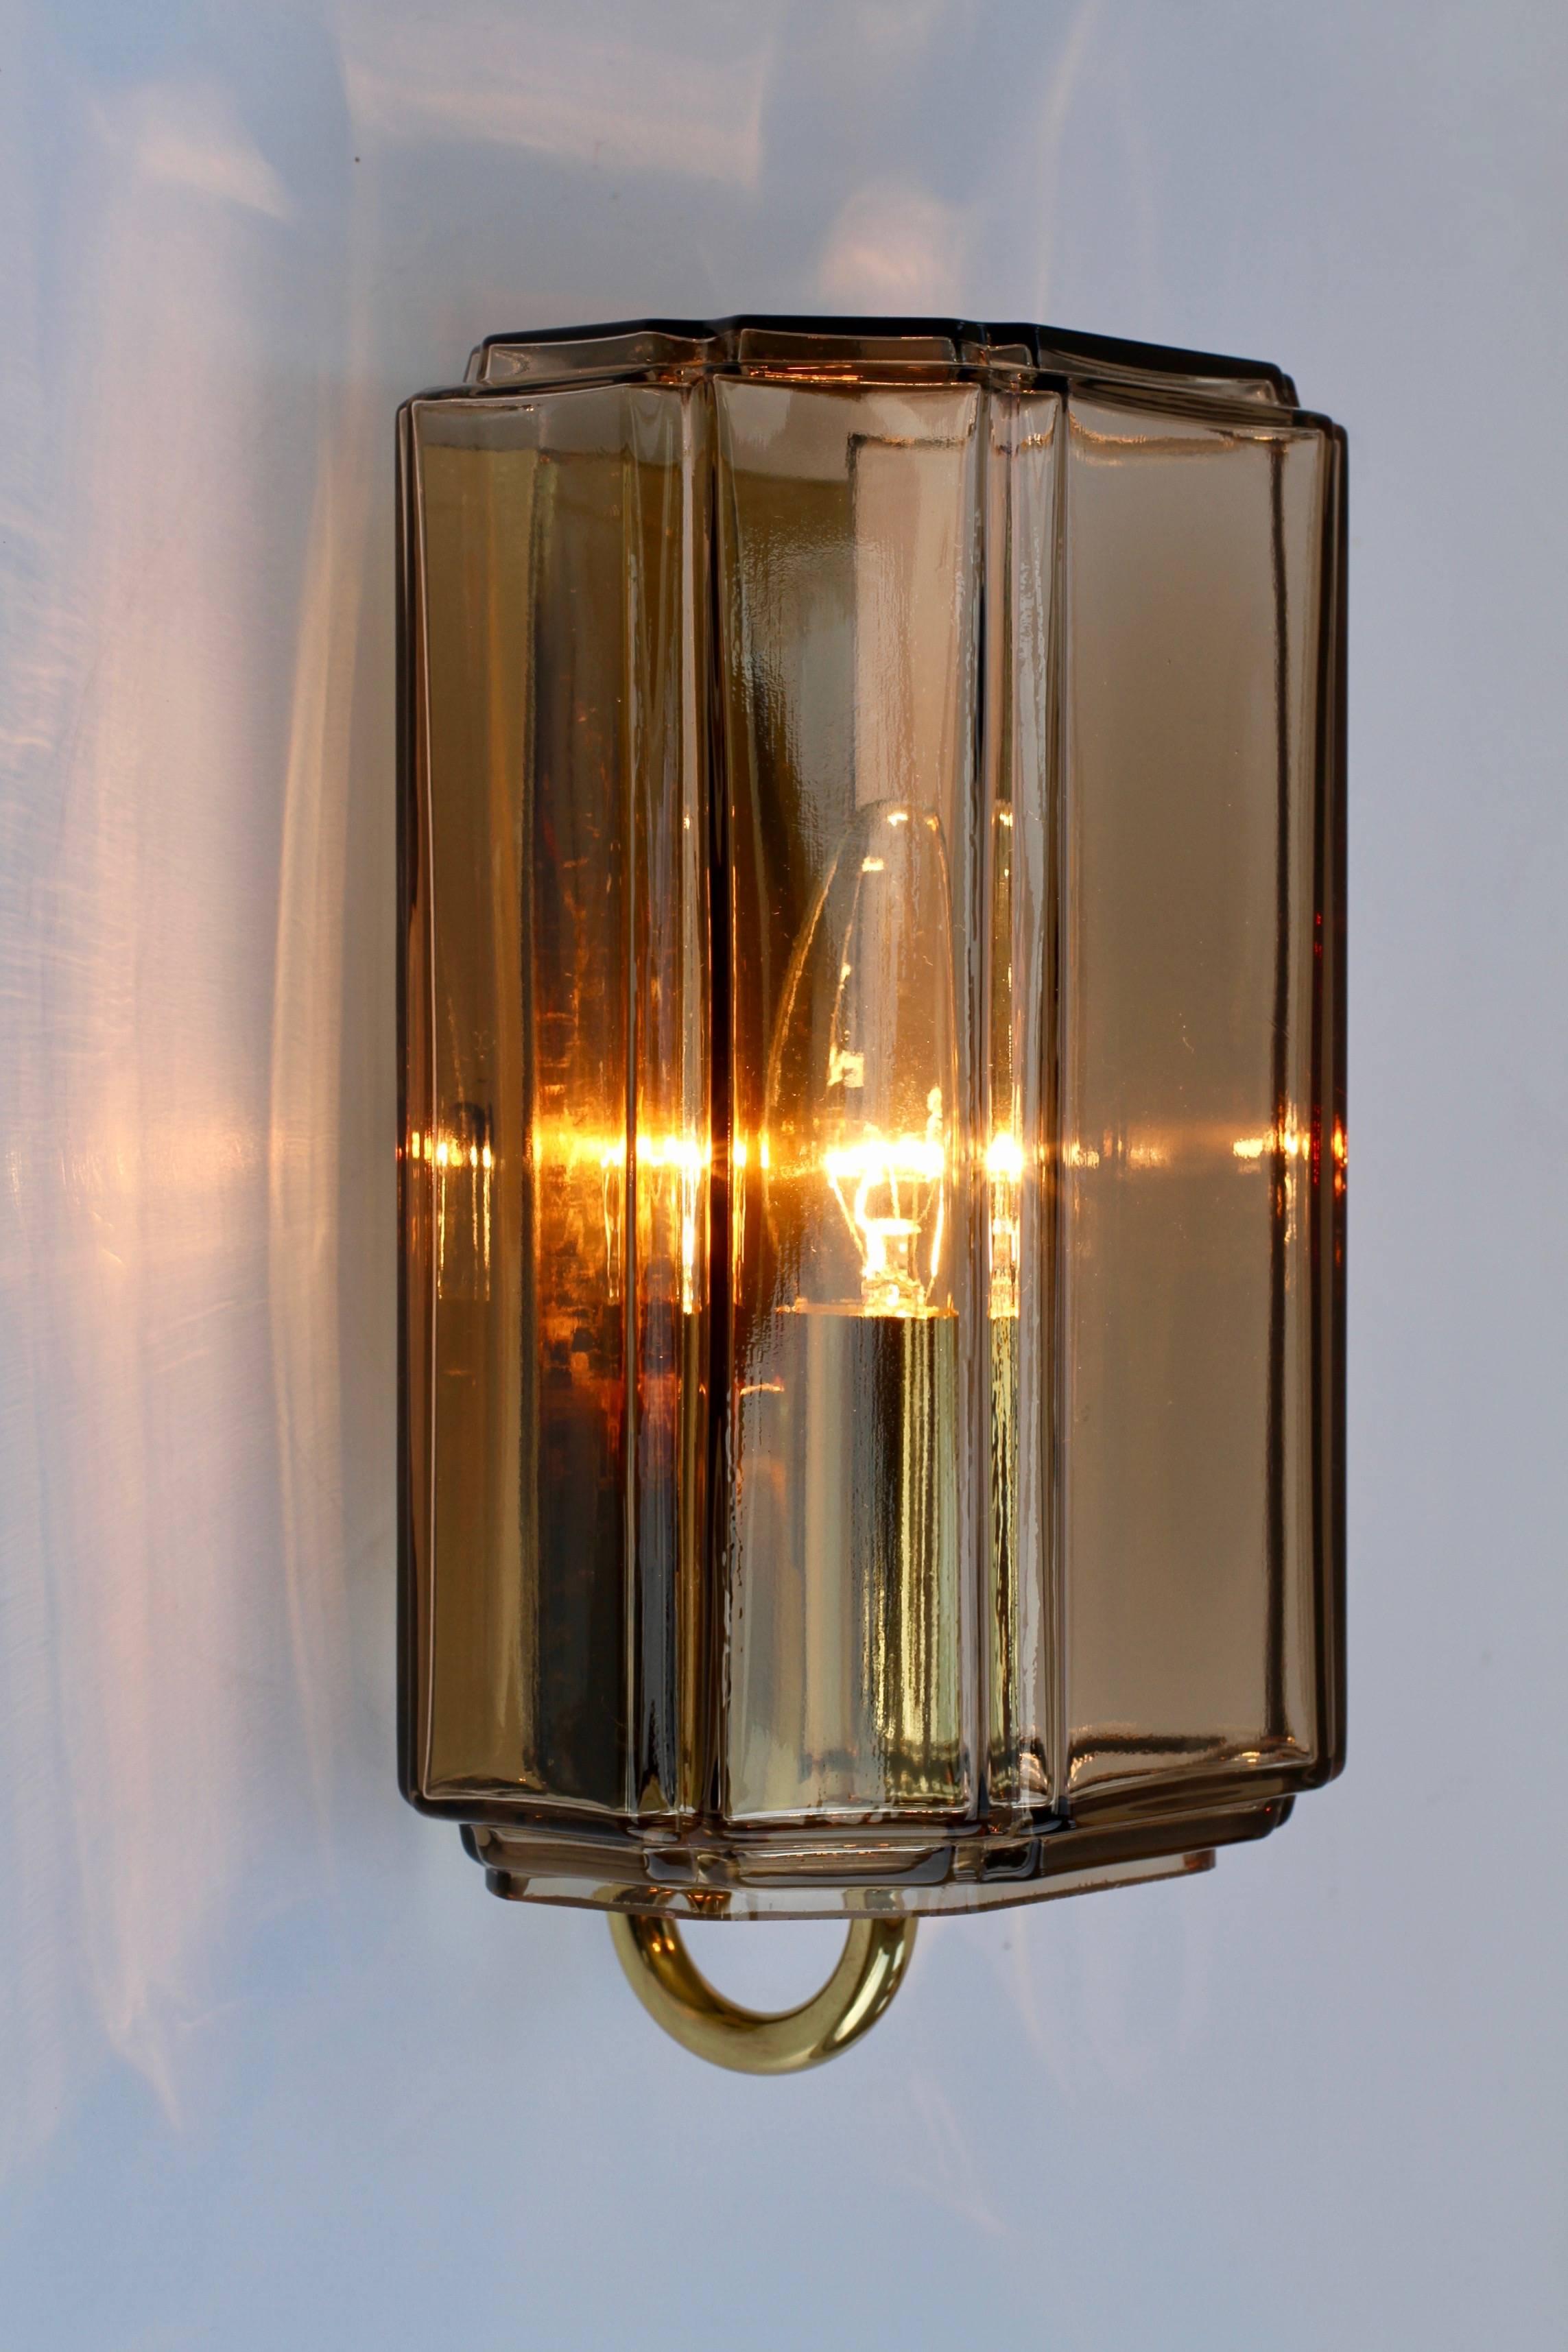 Set of three wonderful German wall-mounted single socketed light fixtures, sconces or lamps by Glashütte Limburg, circa 1965-1975. The geometric form of the smoked amber toned / topaz colored / coloured mouth blown glass illuminates beautifully and